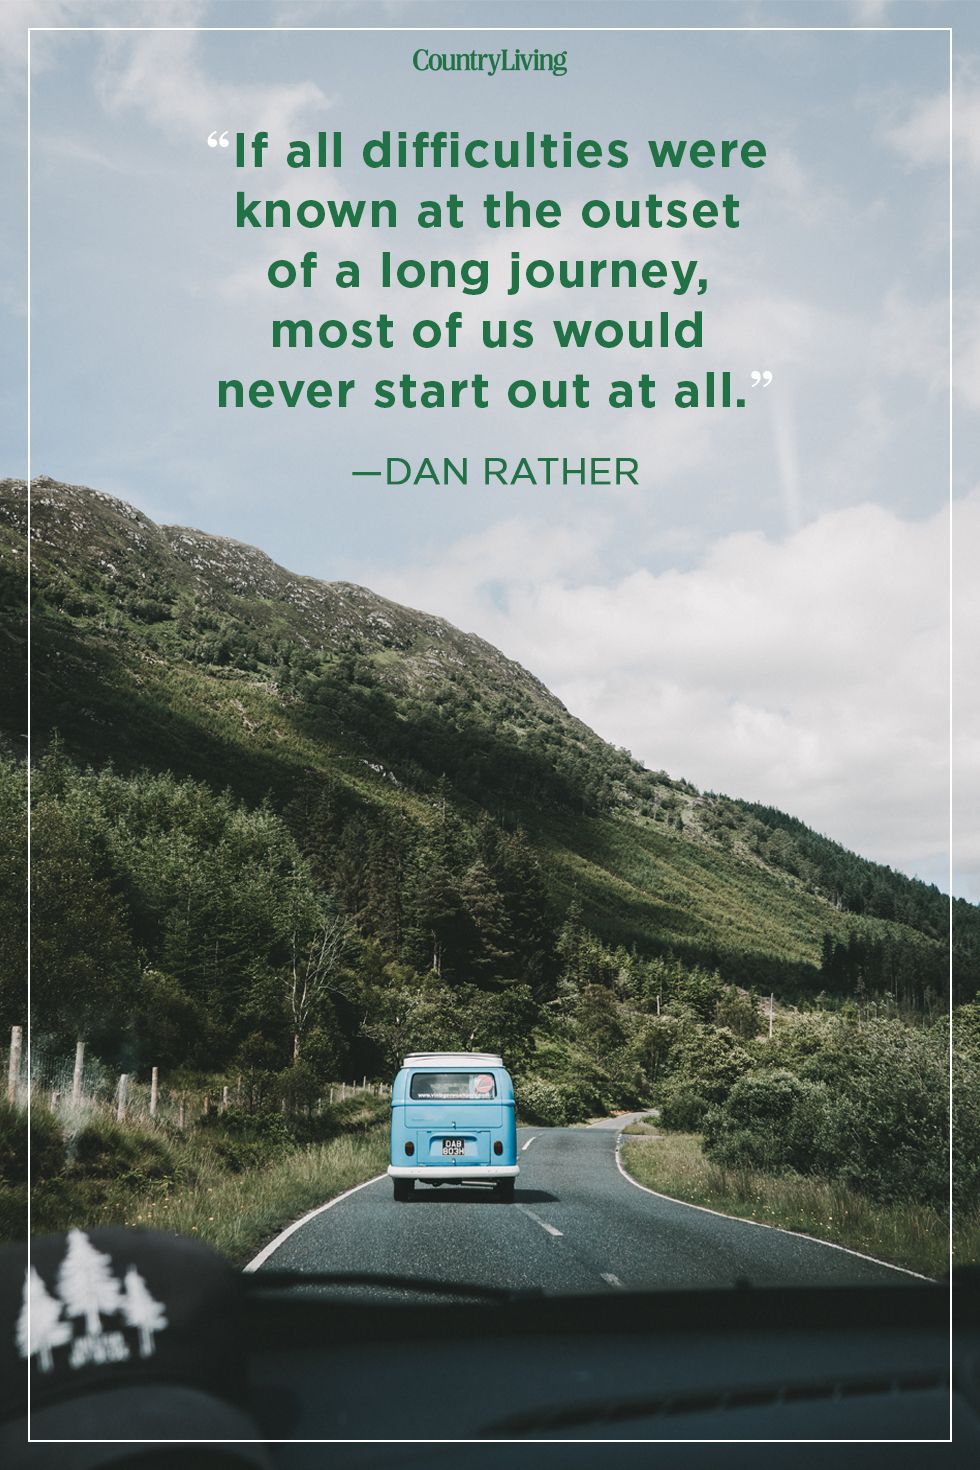 traveling quotes